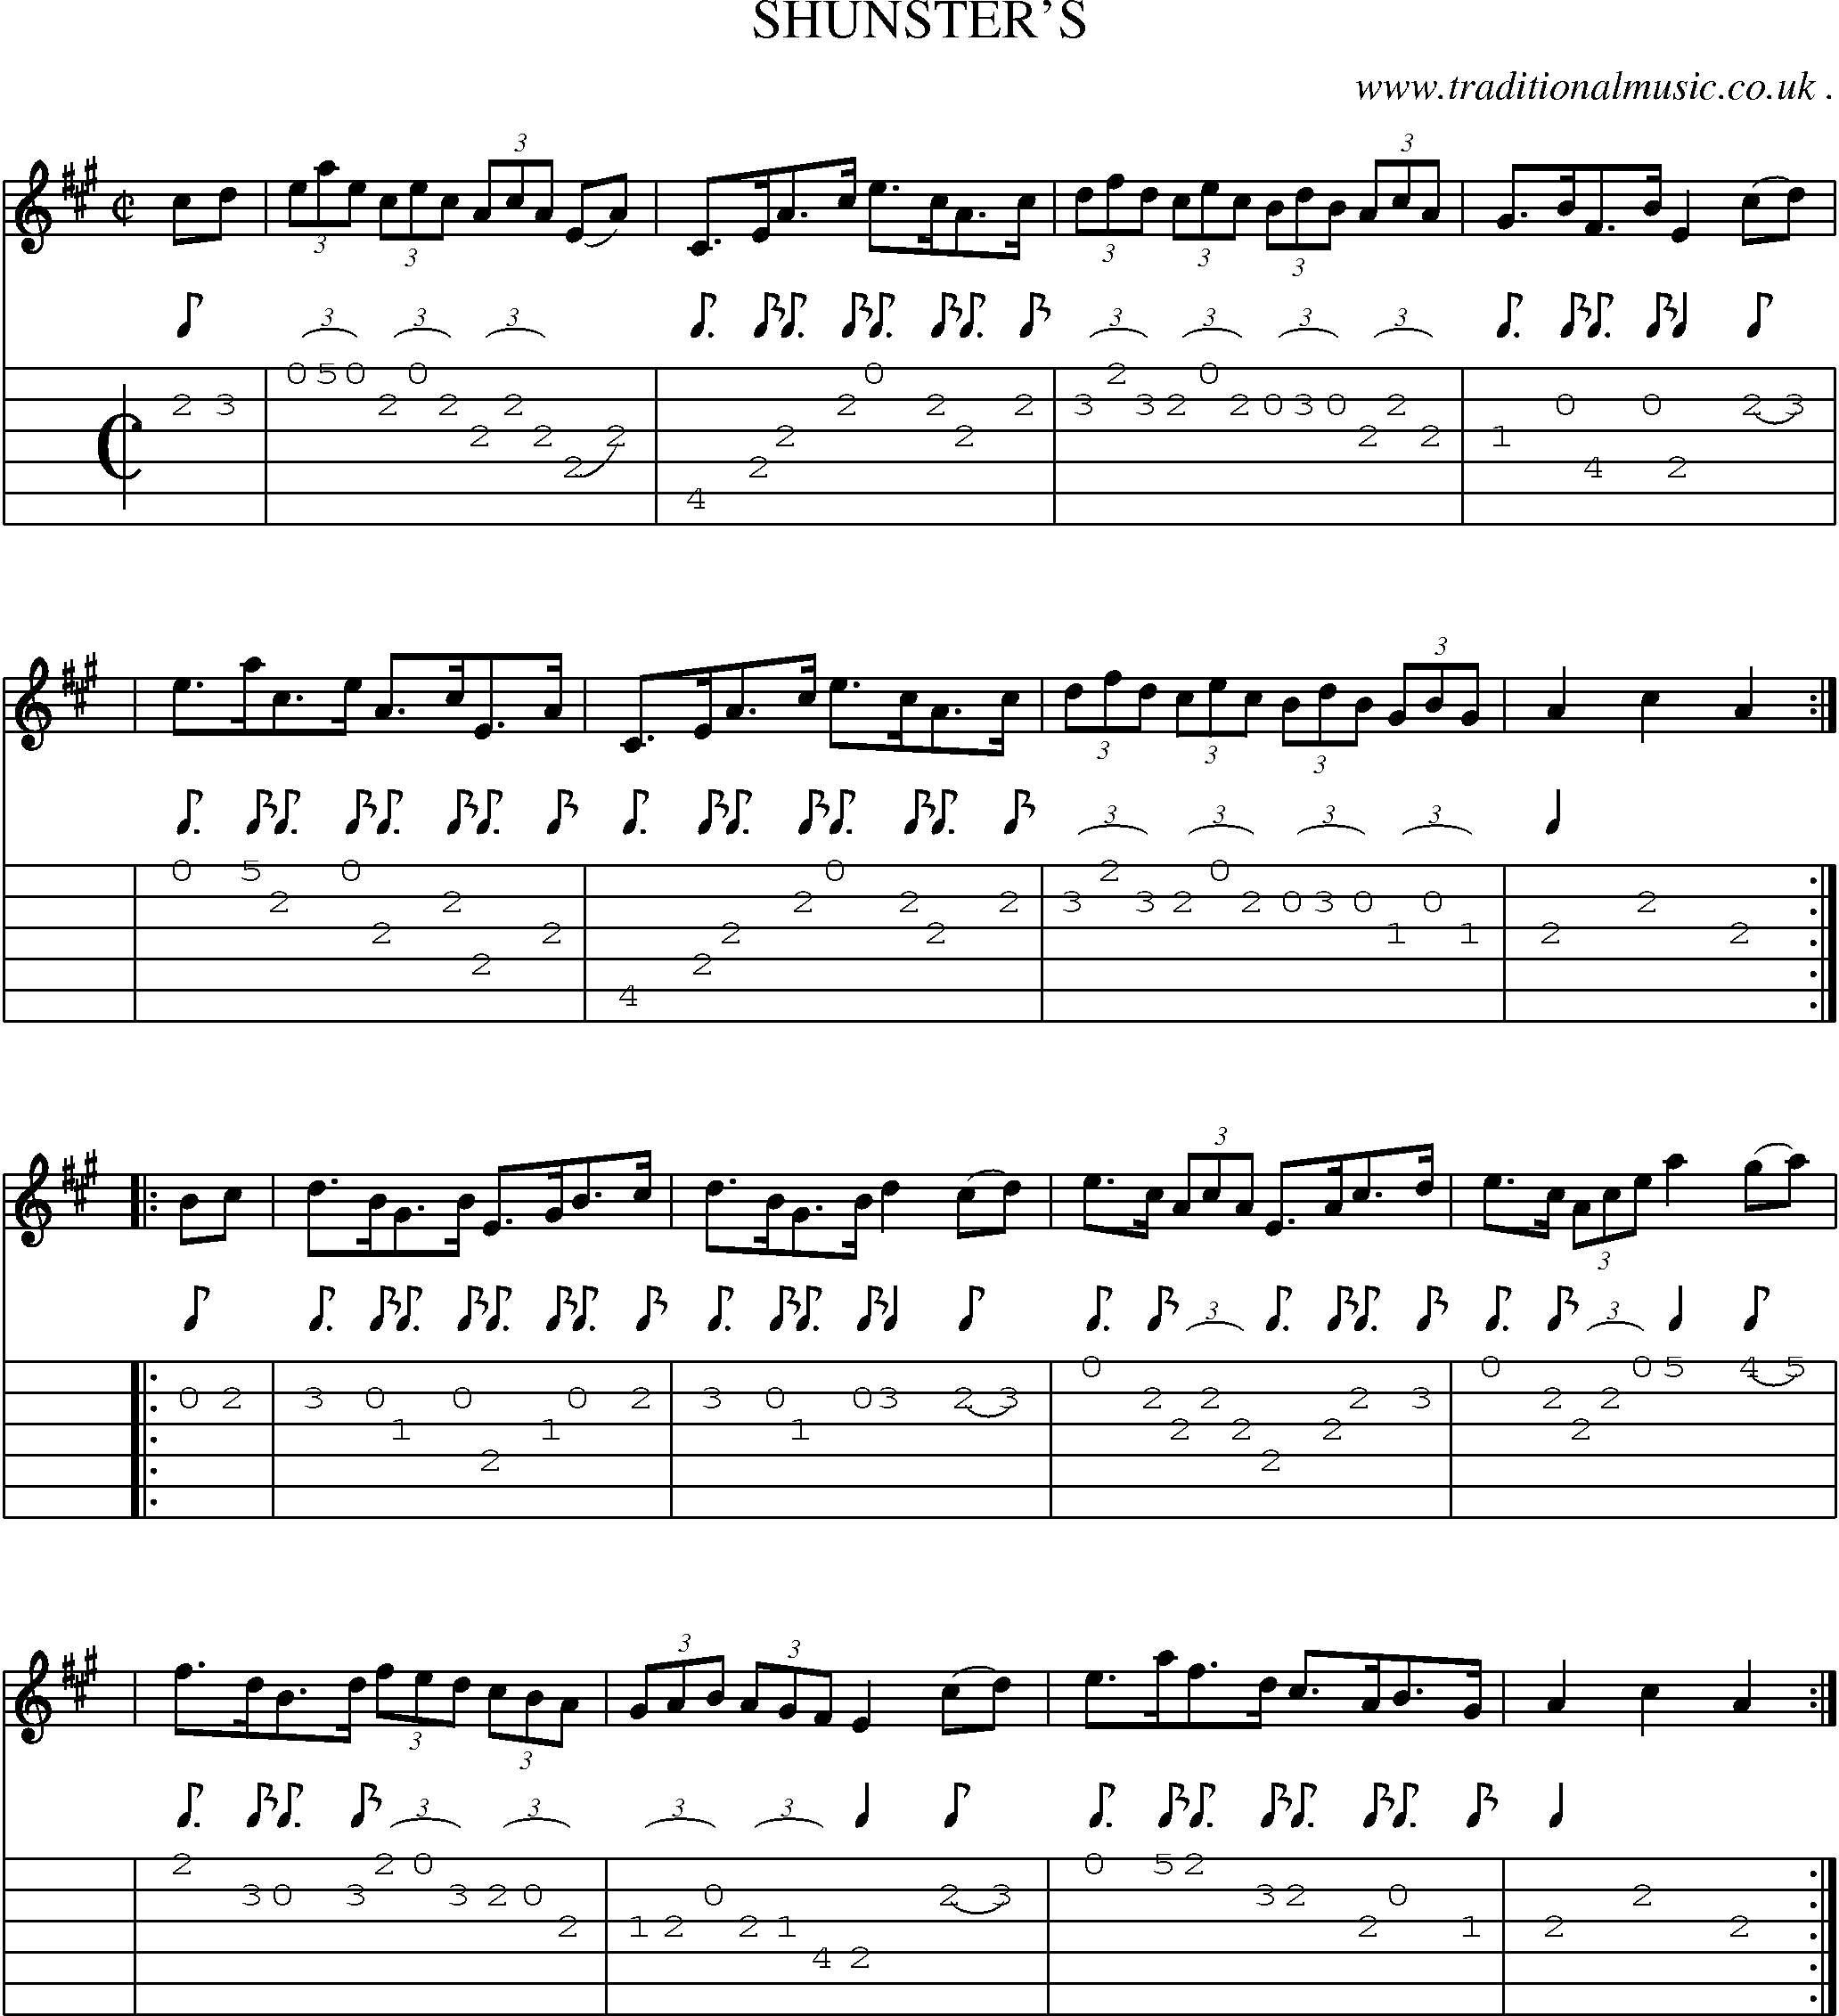 Sheet-Music and Guitar Tabs for Shunsters